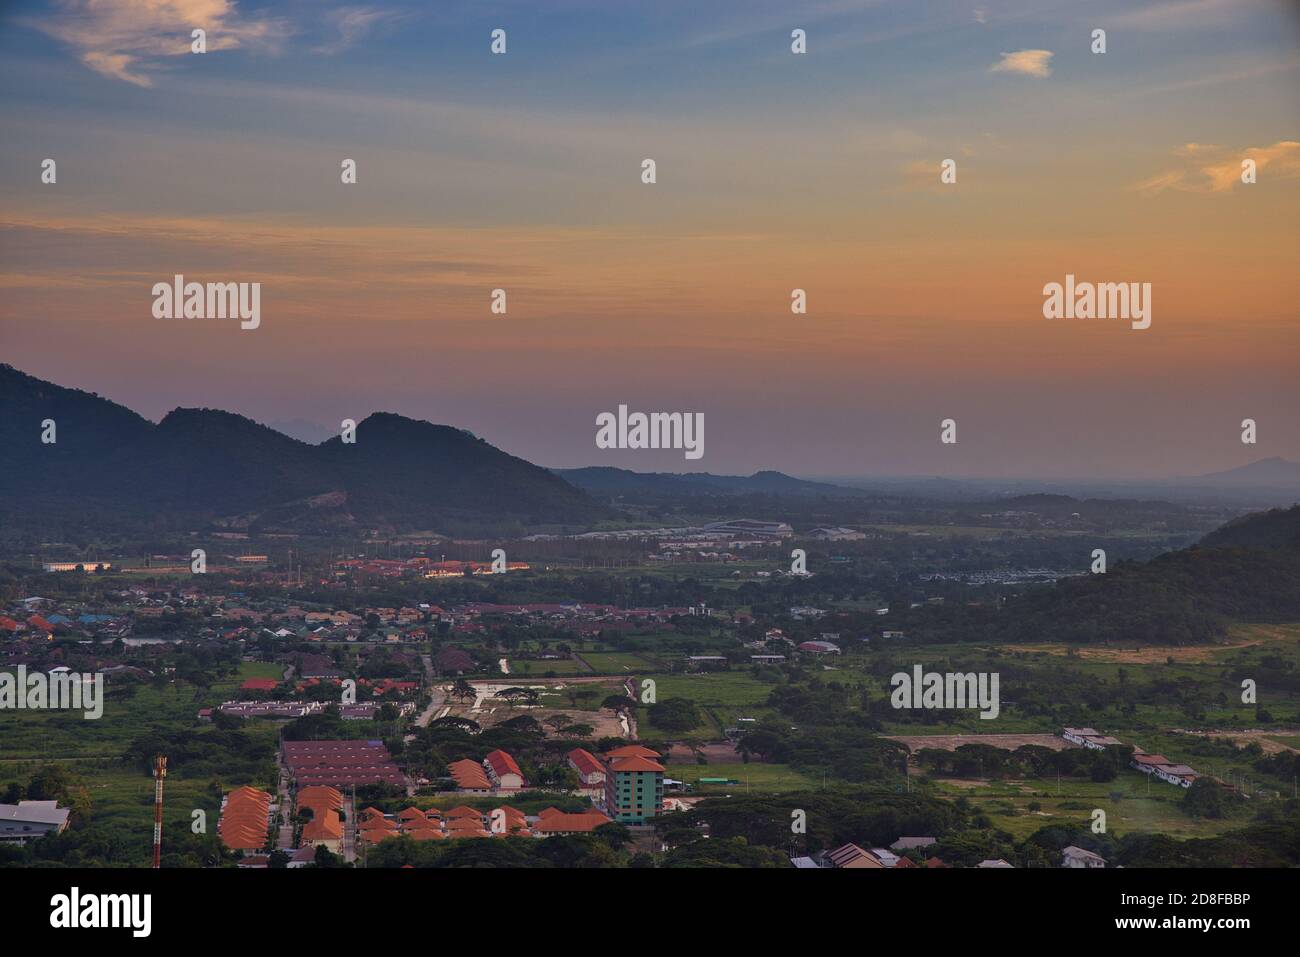 This unique photo shows the sunset in late October over the Thai seaside town called Hua Hin. you can see the houses and mountains very well. Stock Photo